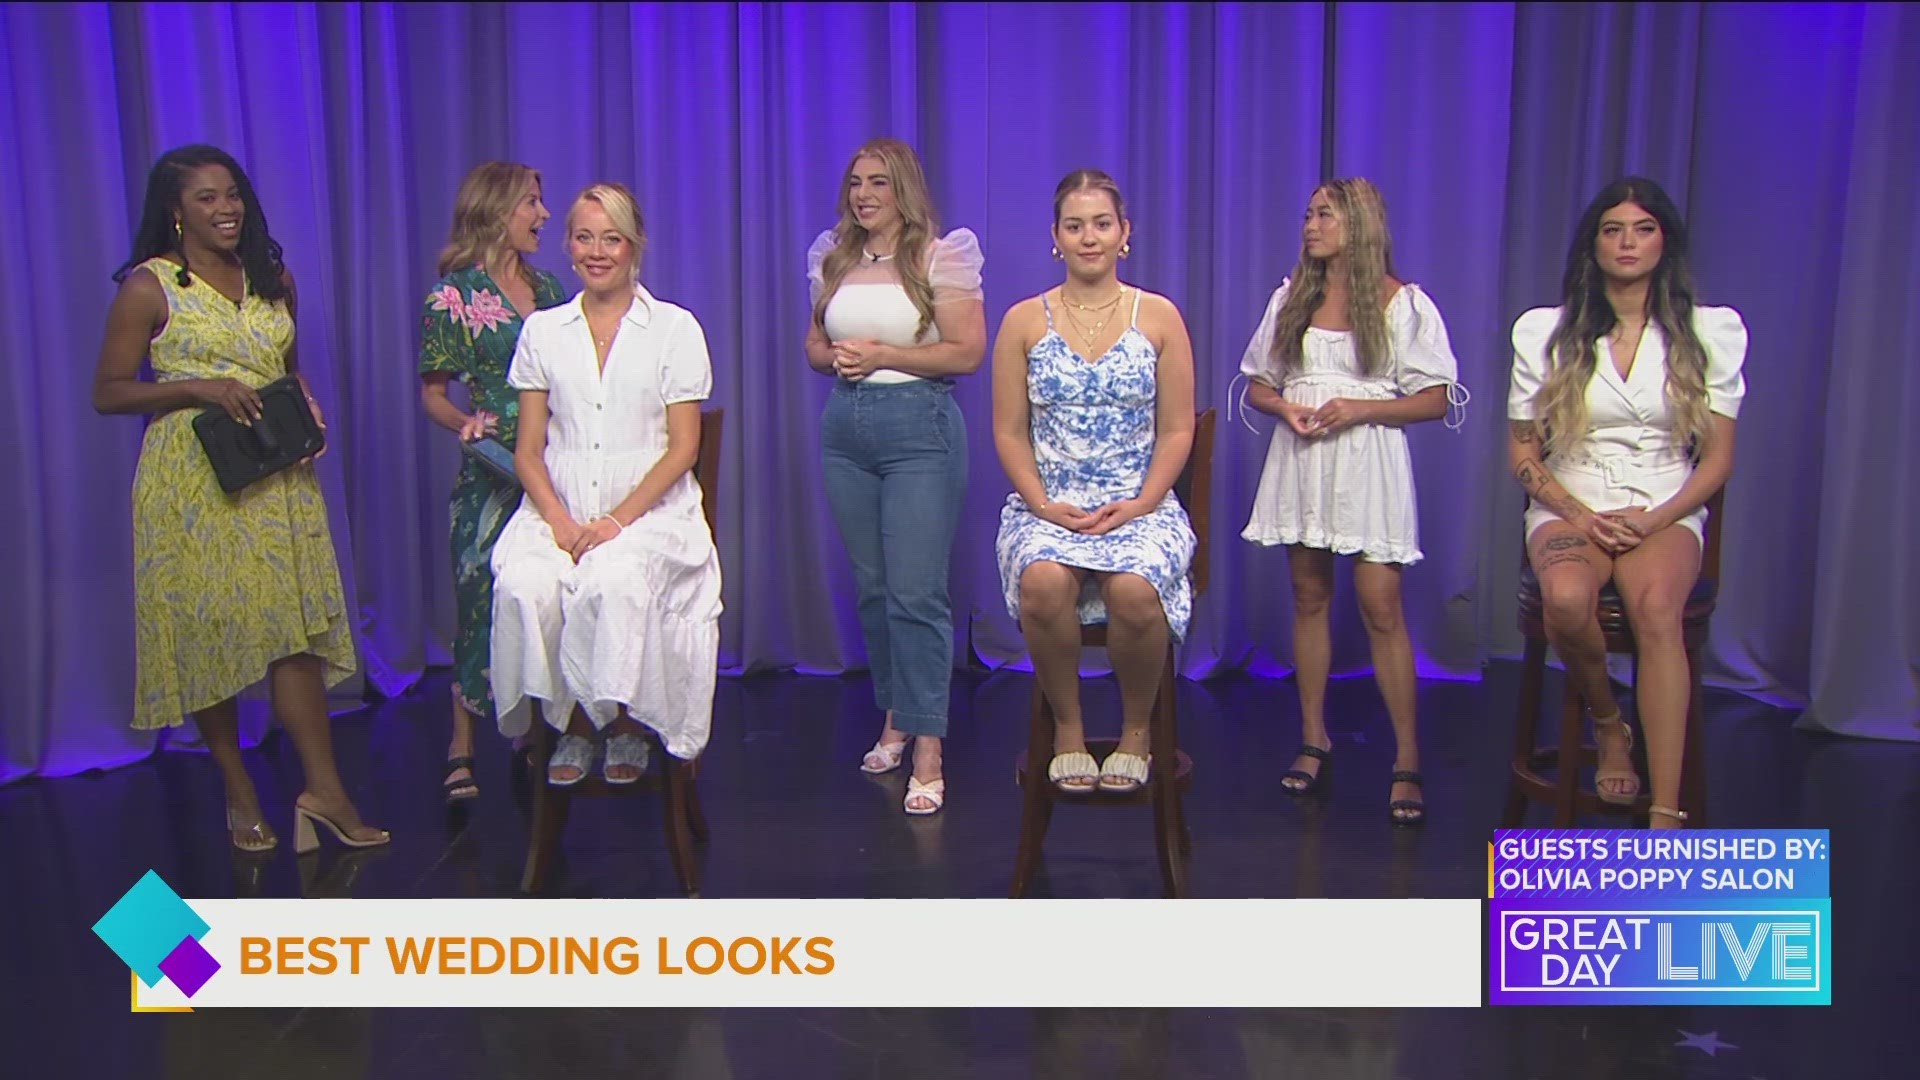 Callie Barber, owner of Olivia Poppy Salon, shares new hairstyle trends that are perfect for wedding season.